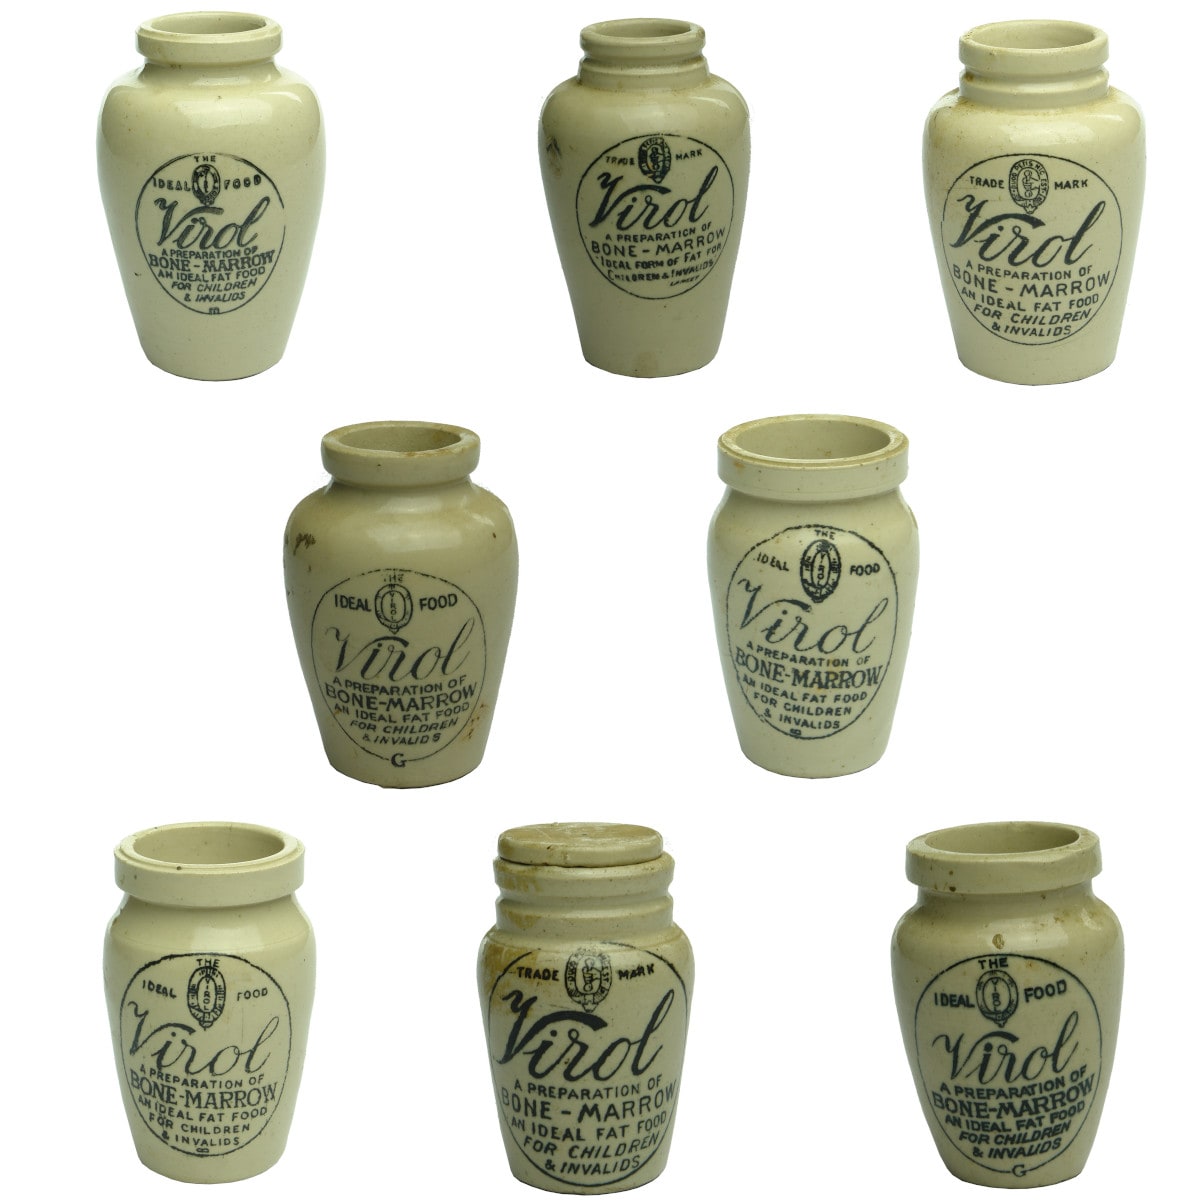 8 x Virol Jars. Most are different and a range of sizes.